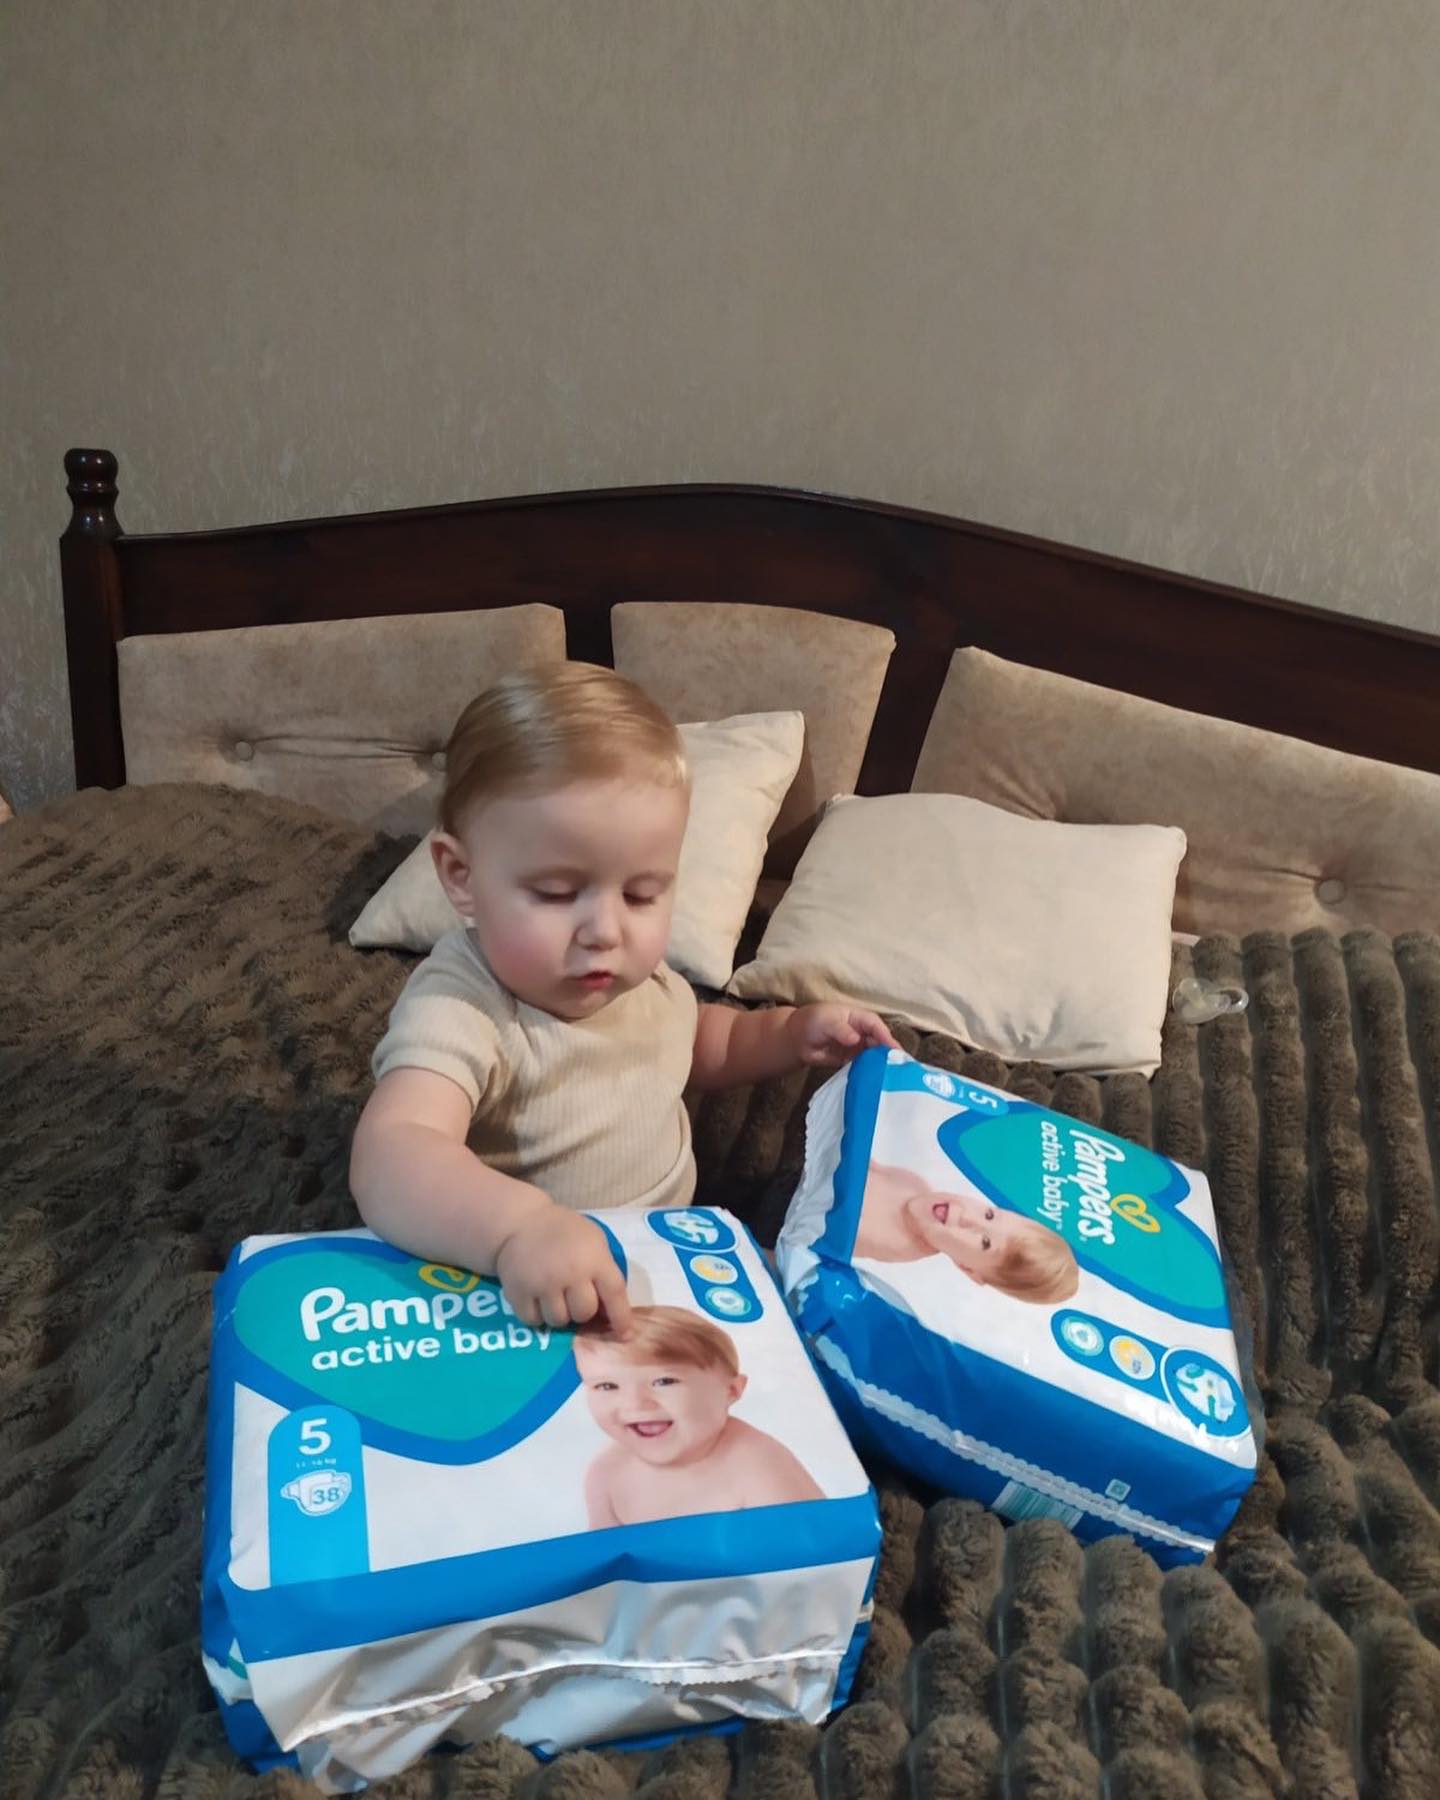 A baby sitting on a bed with two boxes of pampers diapers.